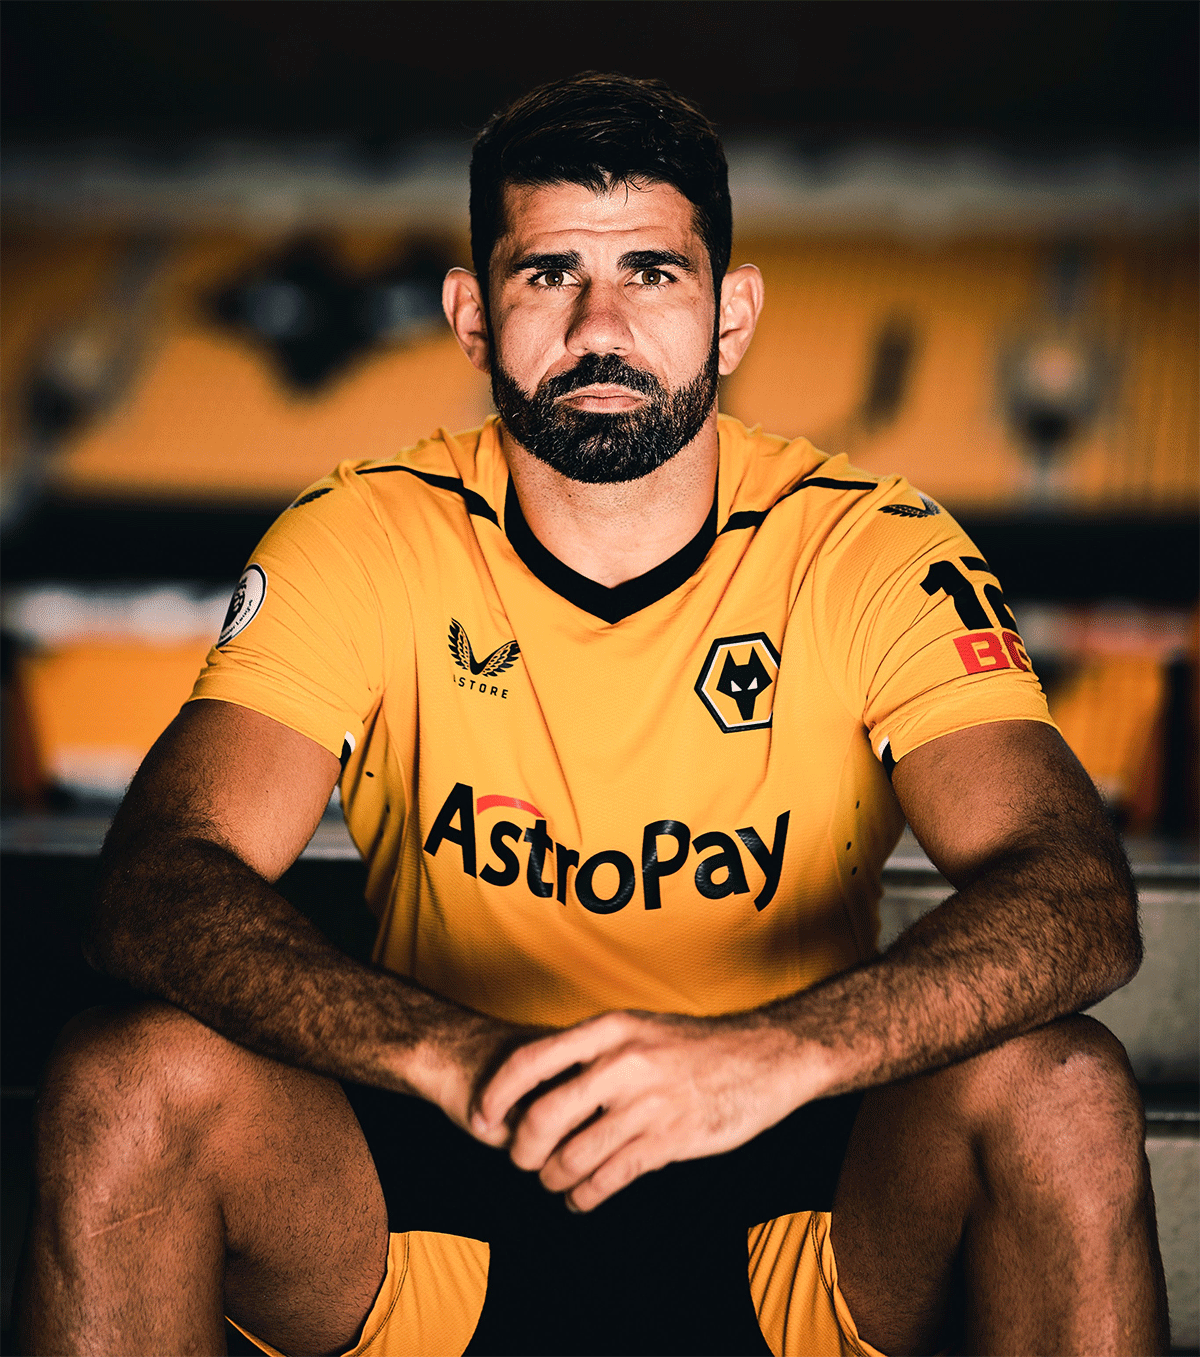 Diego Costa, 33, was a free agent after leaving Brazilian side Atletico Mineiro in January and has signed a one-year deal with the Wolves. 